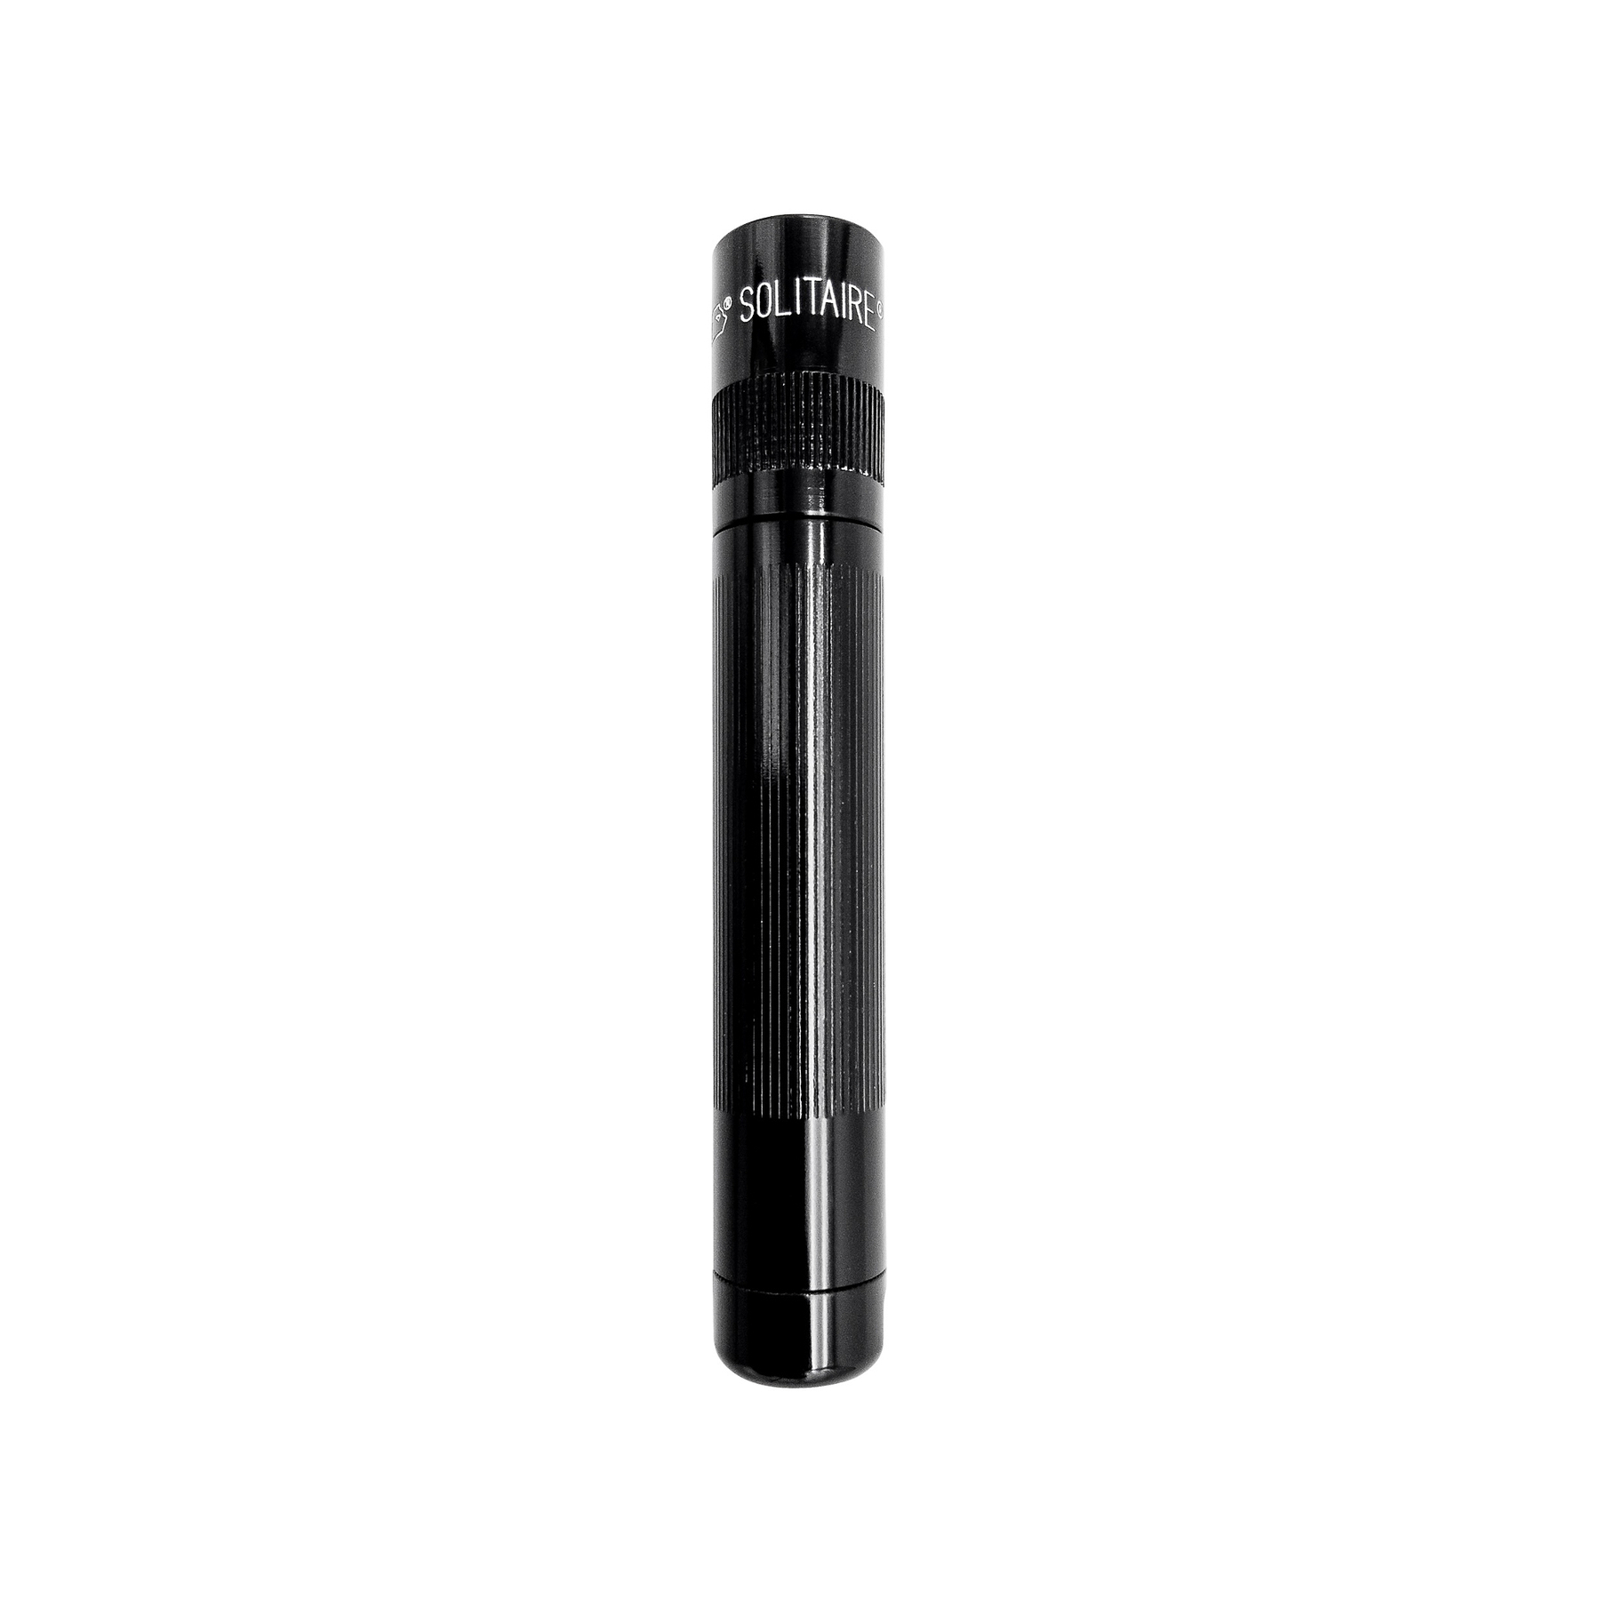 Maglite Xenon torch Solitaire 1-Cell AAA black